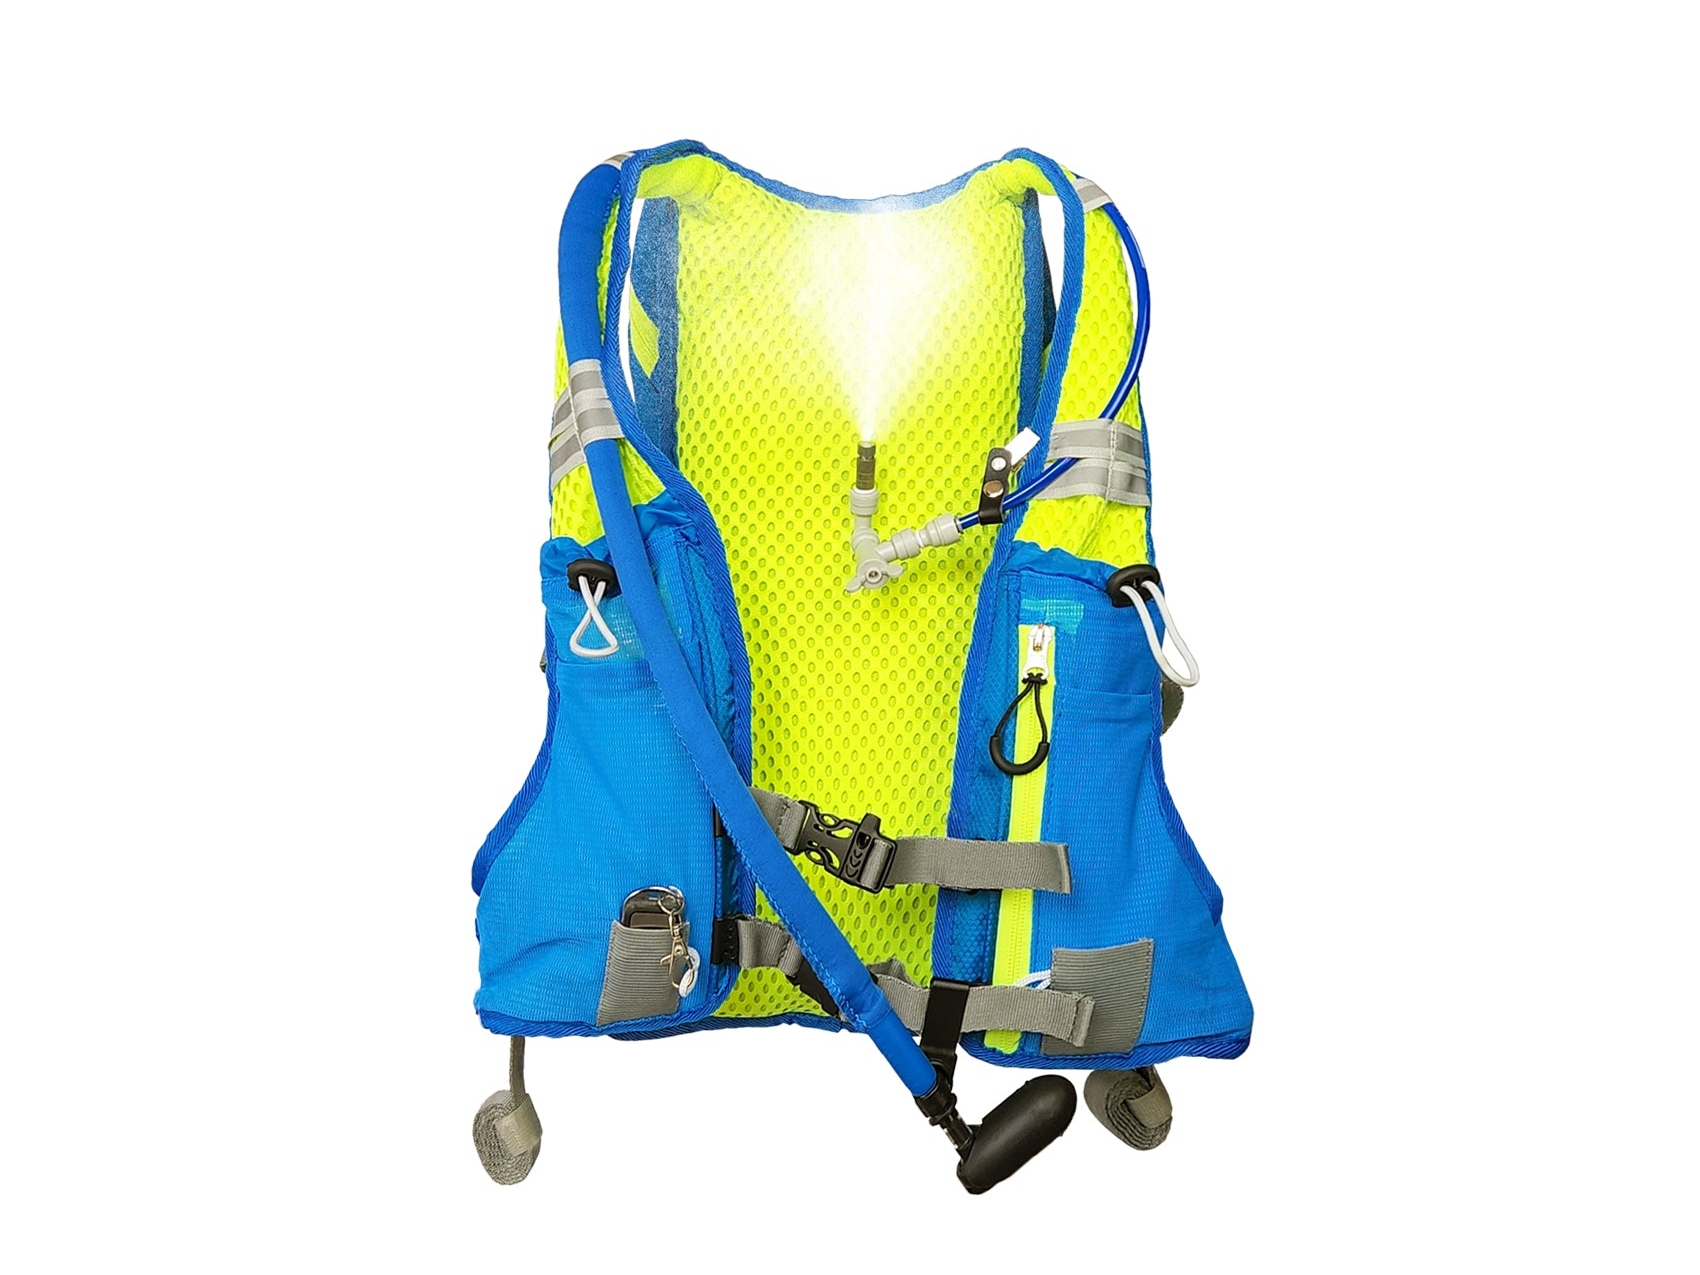 ExtremeMist Misting & Drinking Hydration Backpack, Blue, Small